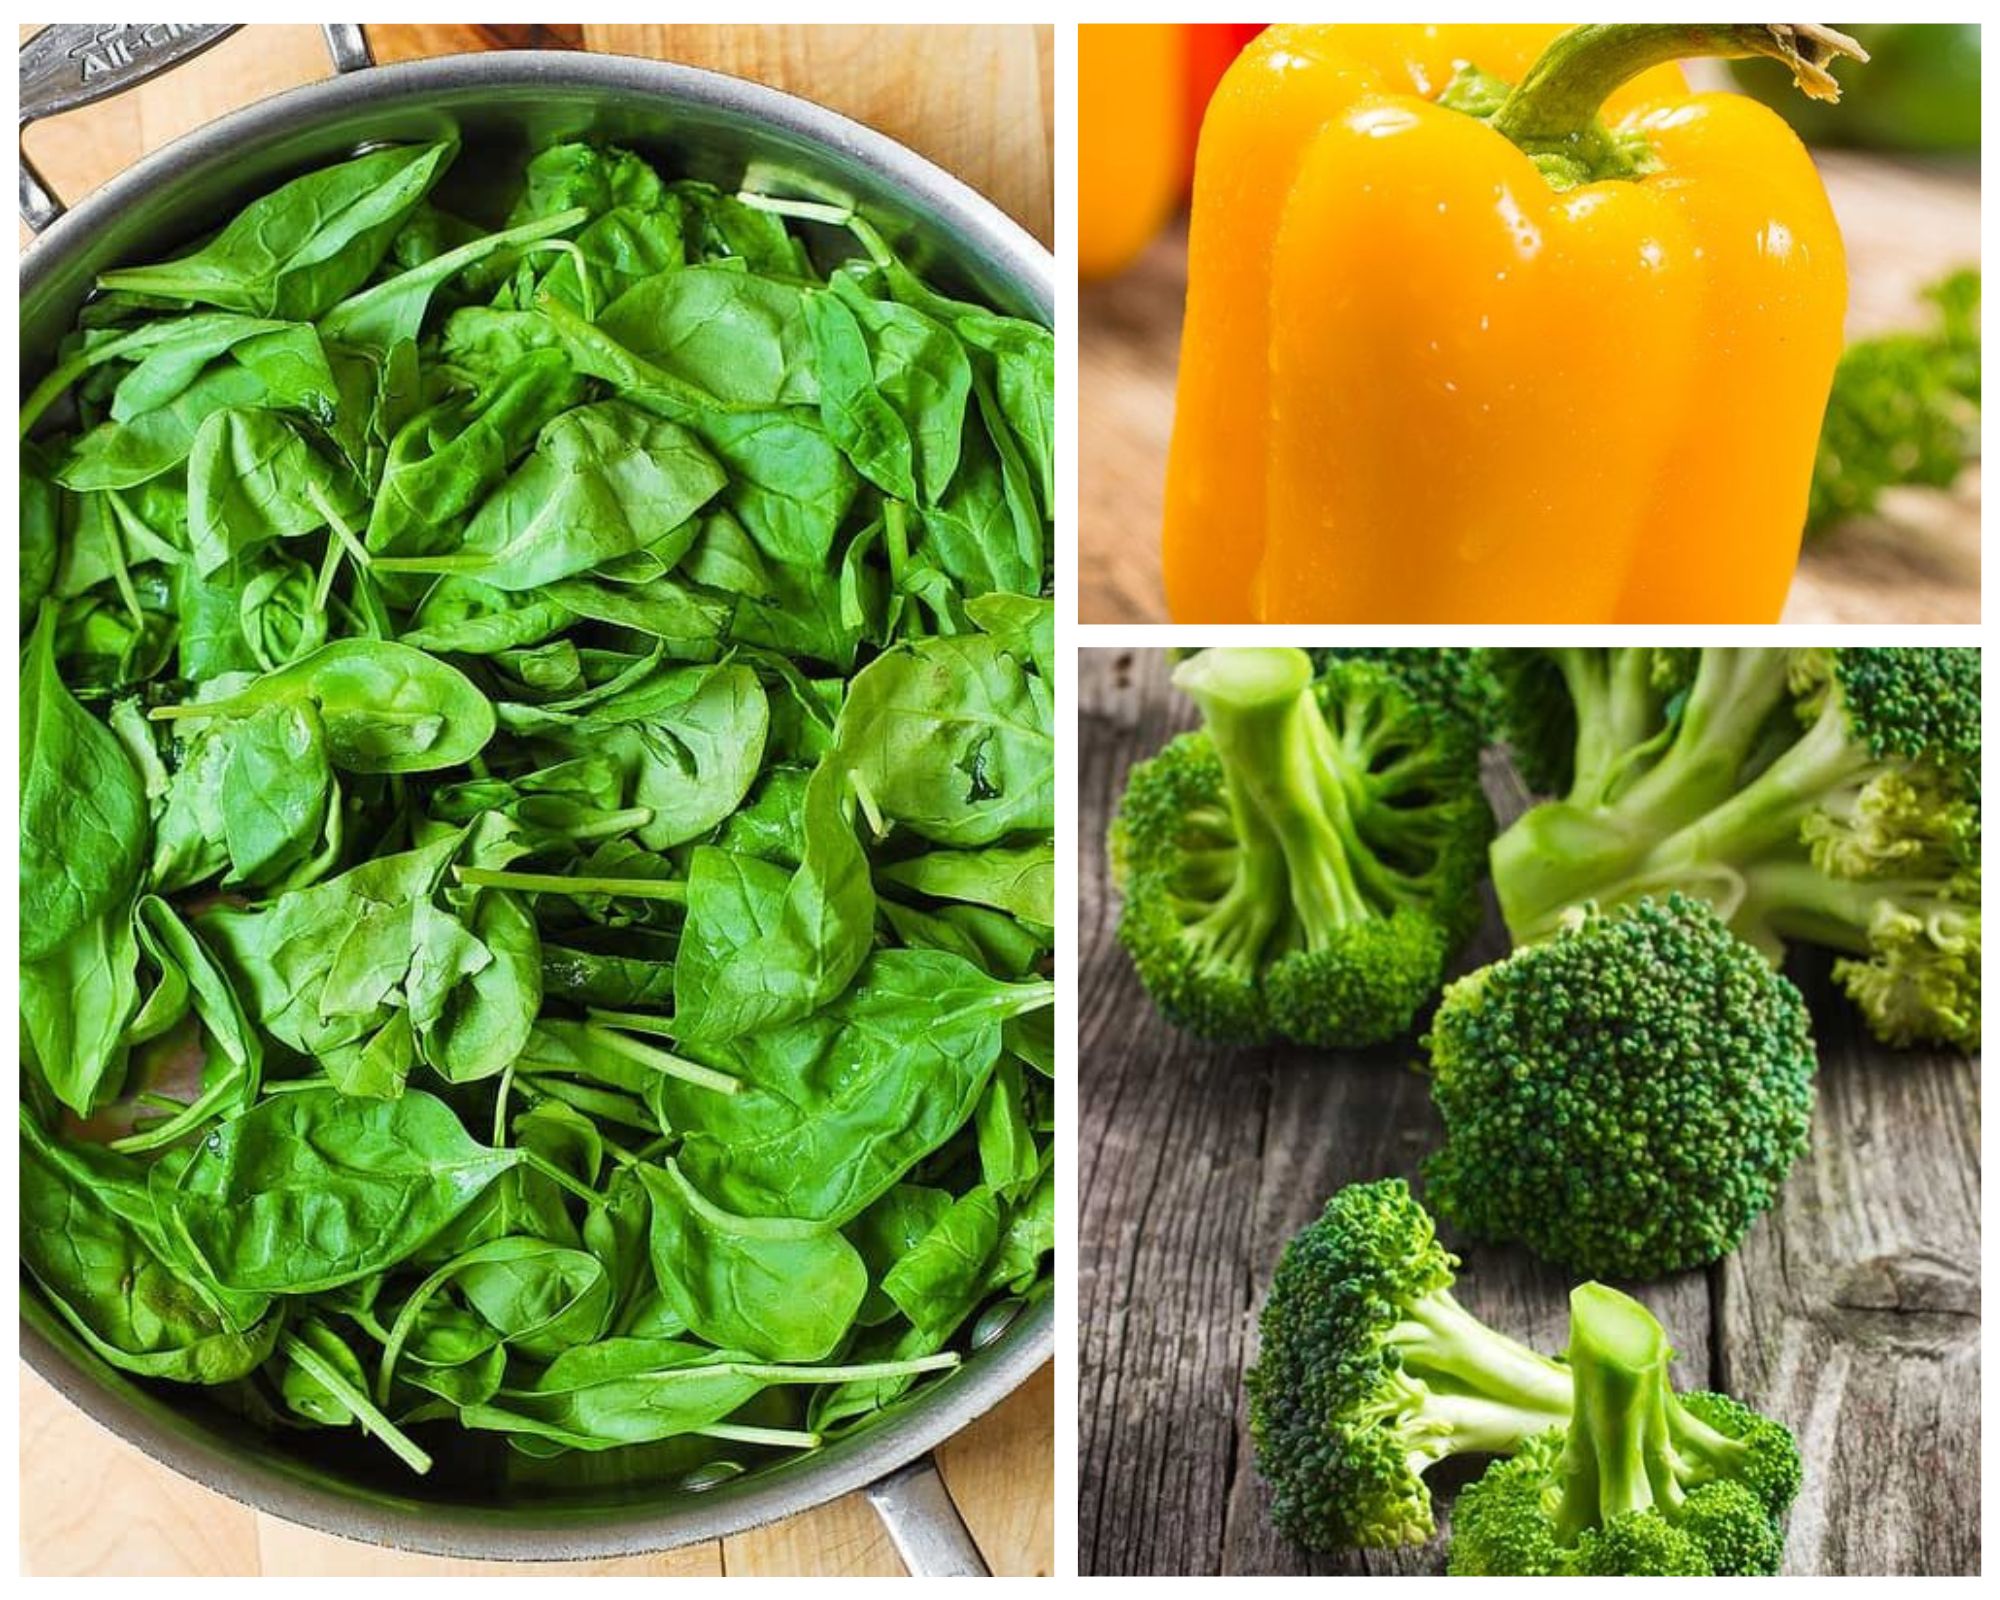 5 Super-Veggies That Can Boost Your Health and Wellness